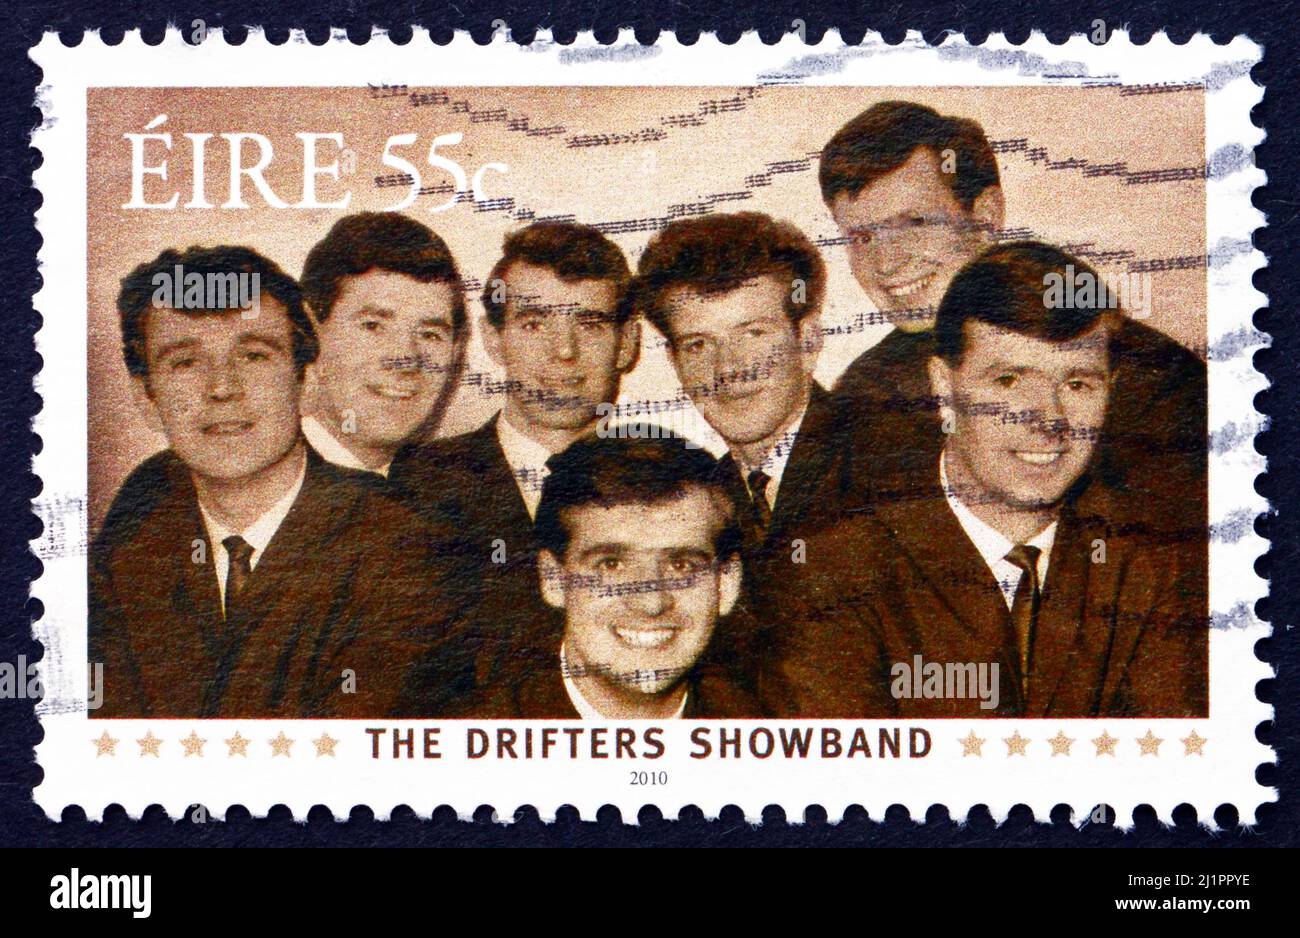 IRELAND - CIRCA 2010: A stamp printed in Ireland shows The Drifters, American Vocal Group, circa 2010 Stock Photo